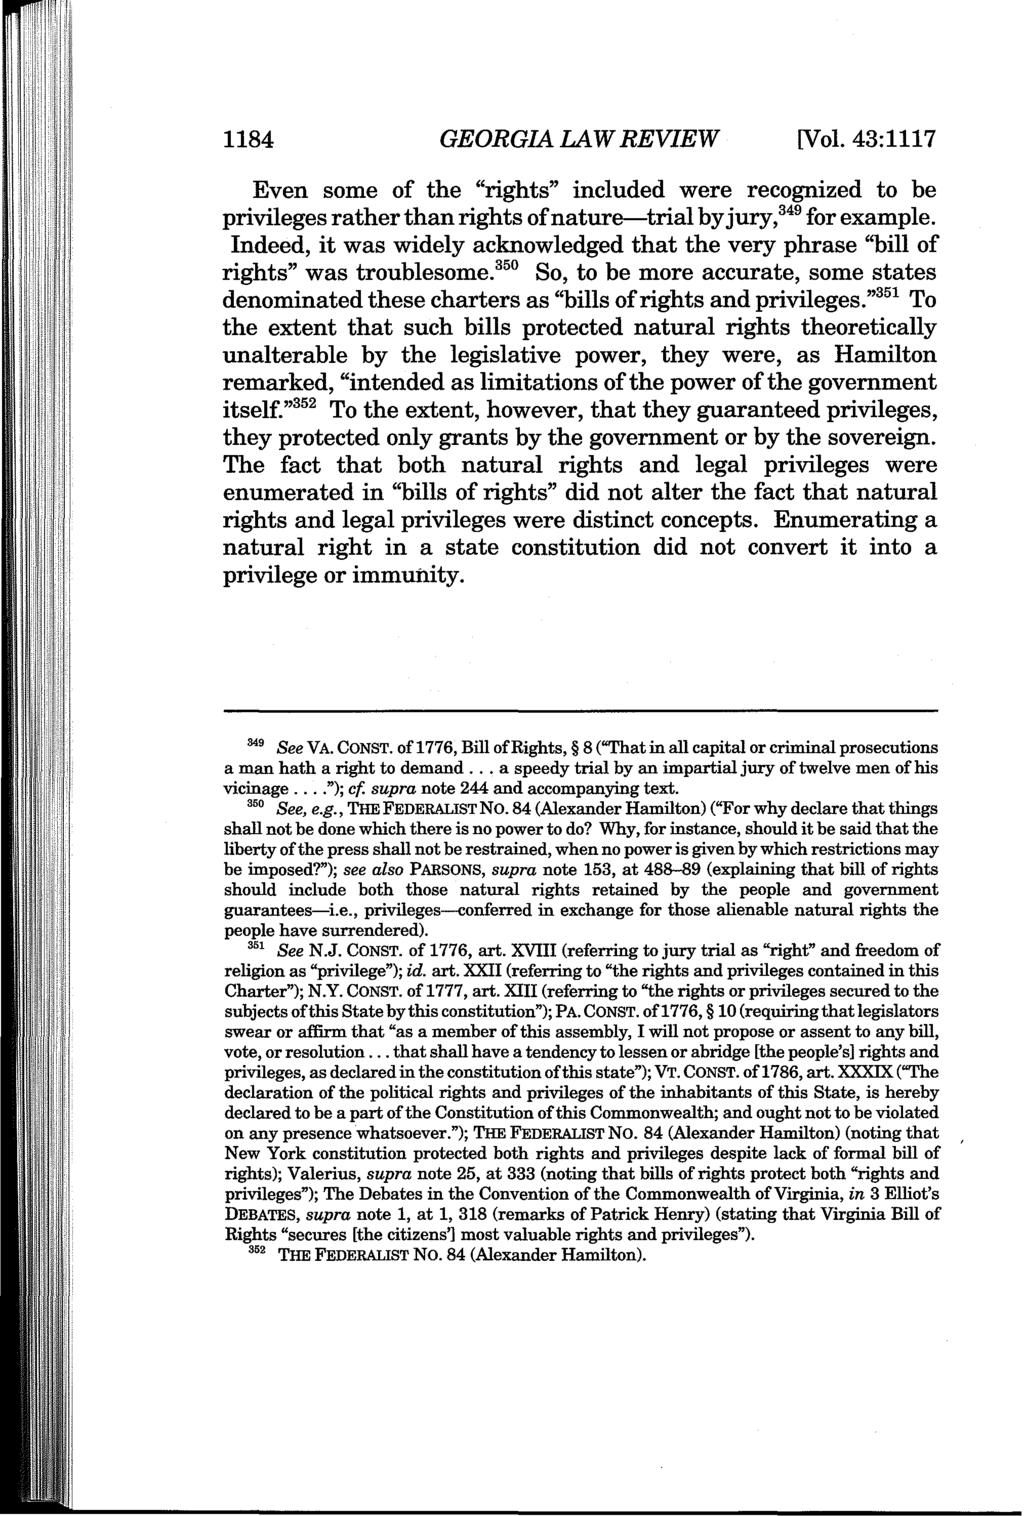 1184 GEORGIA LAWREVIEW [Vol. 43:1117 Even some of the "rights" included were recognized to be privileges ratherthan rights of nature-trial byjury,349for example.